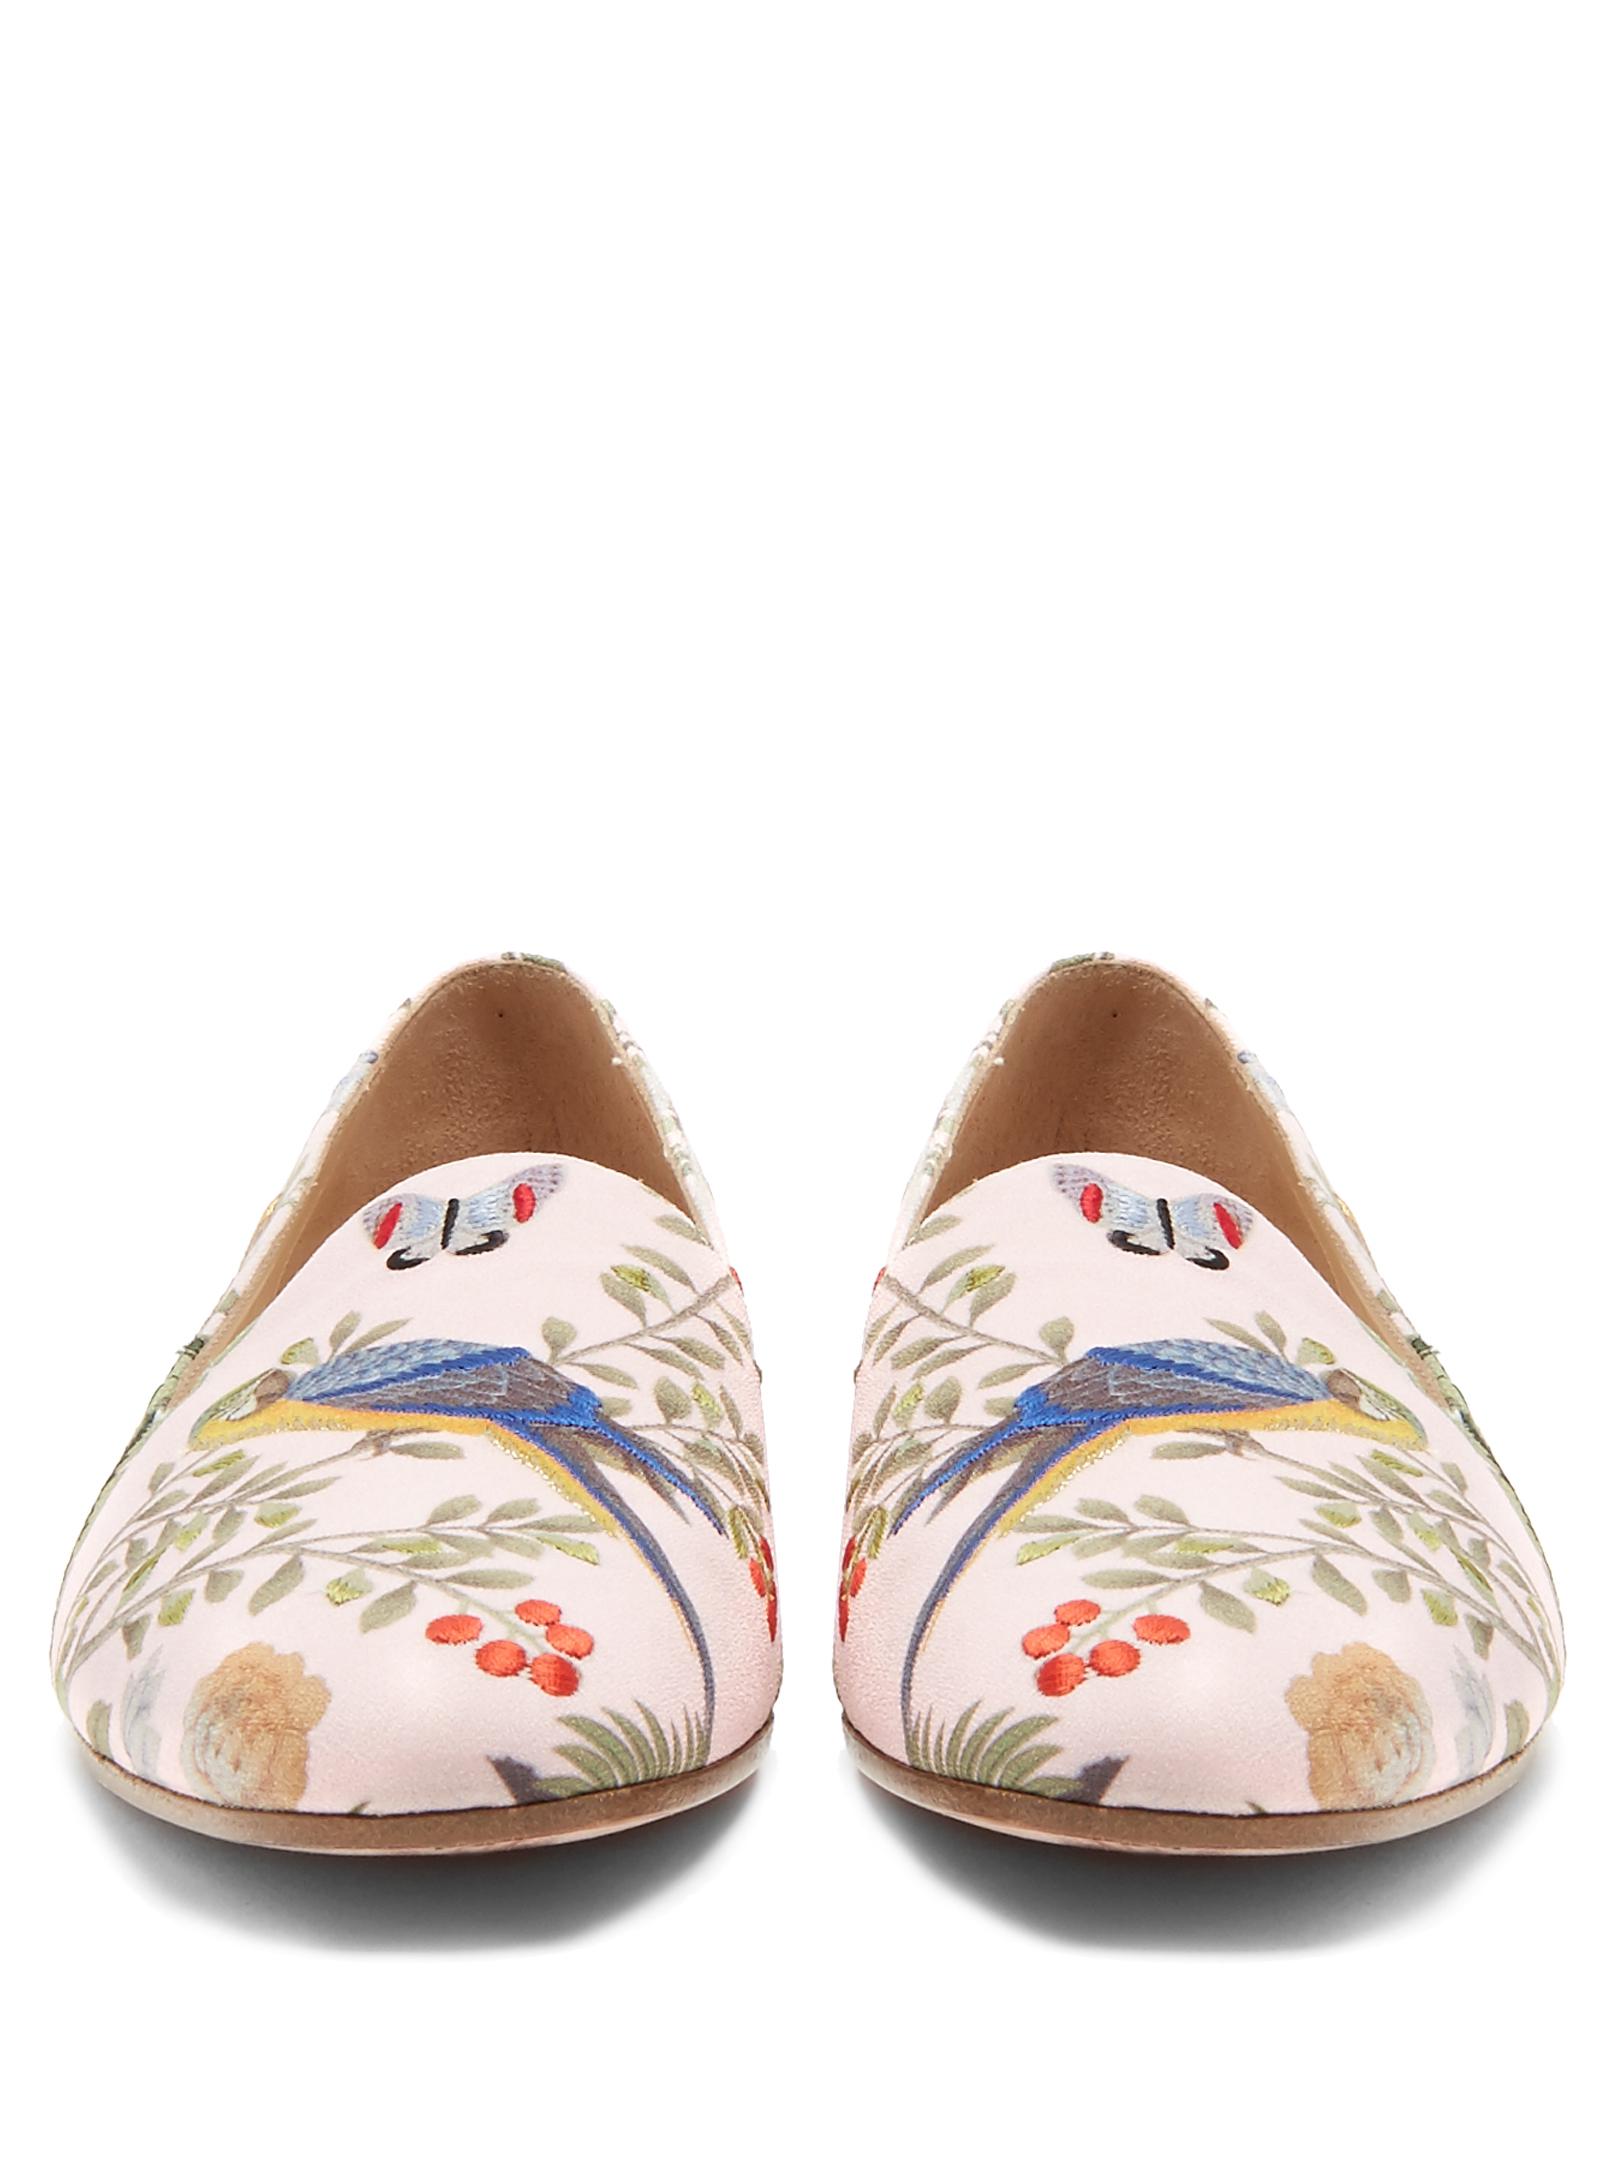 Aquazzura For De Gournay Embroidered Loafer | Lyst